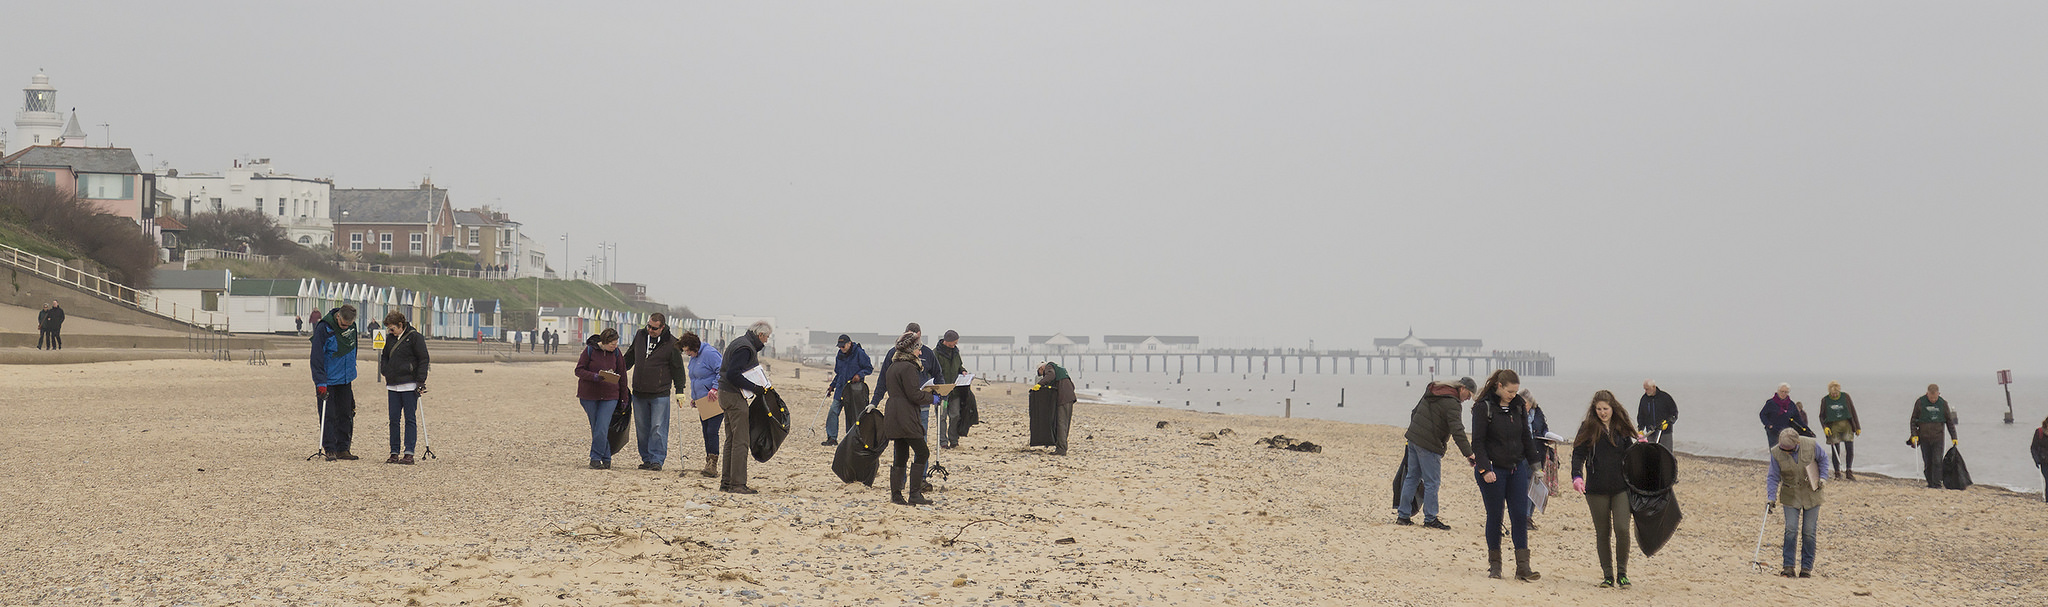 Adnams-led beach clean at Southwold